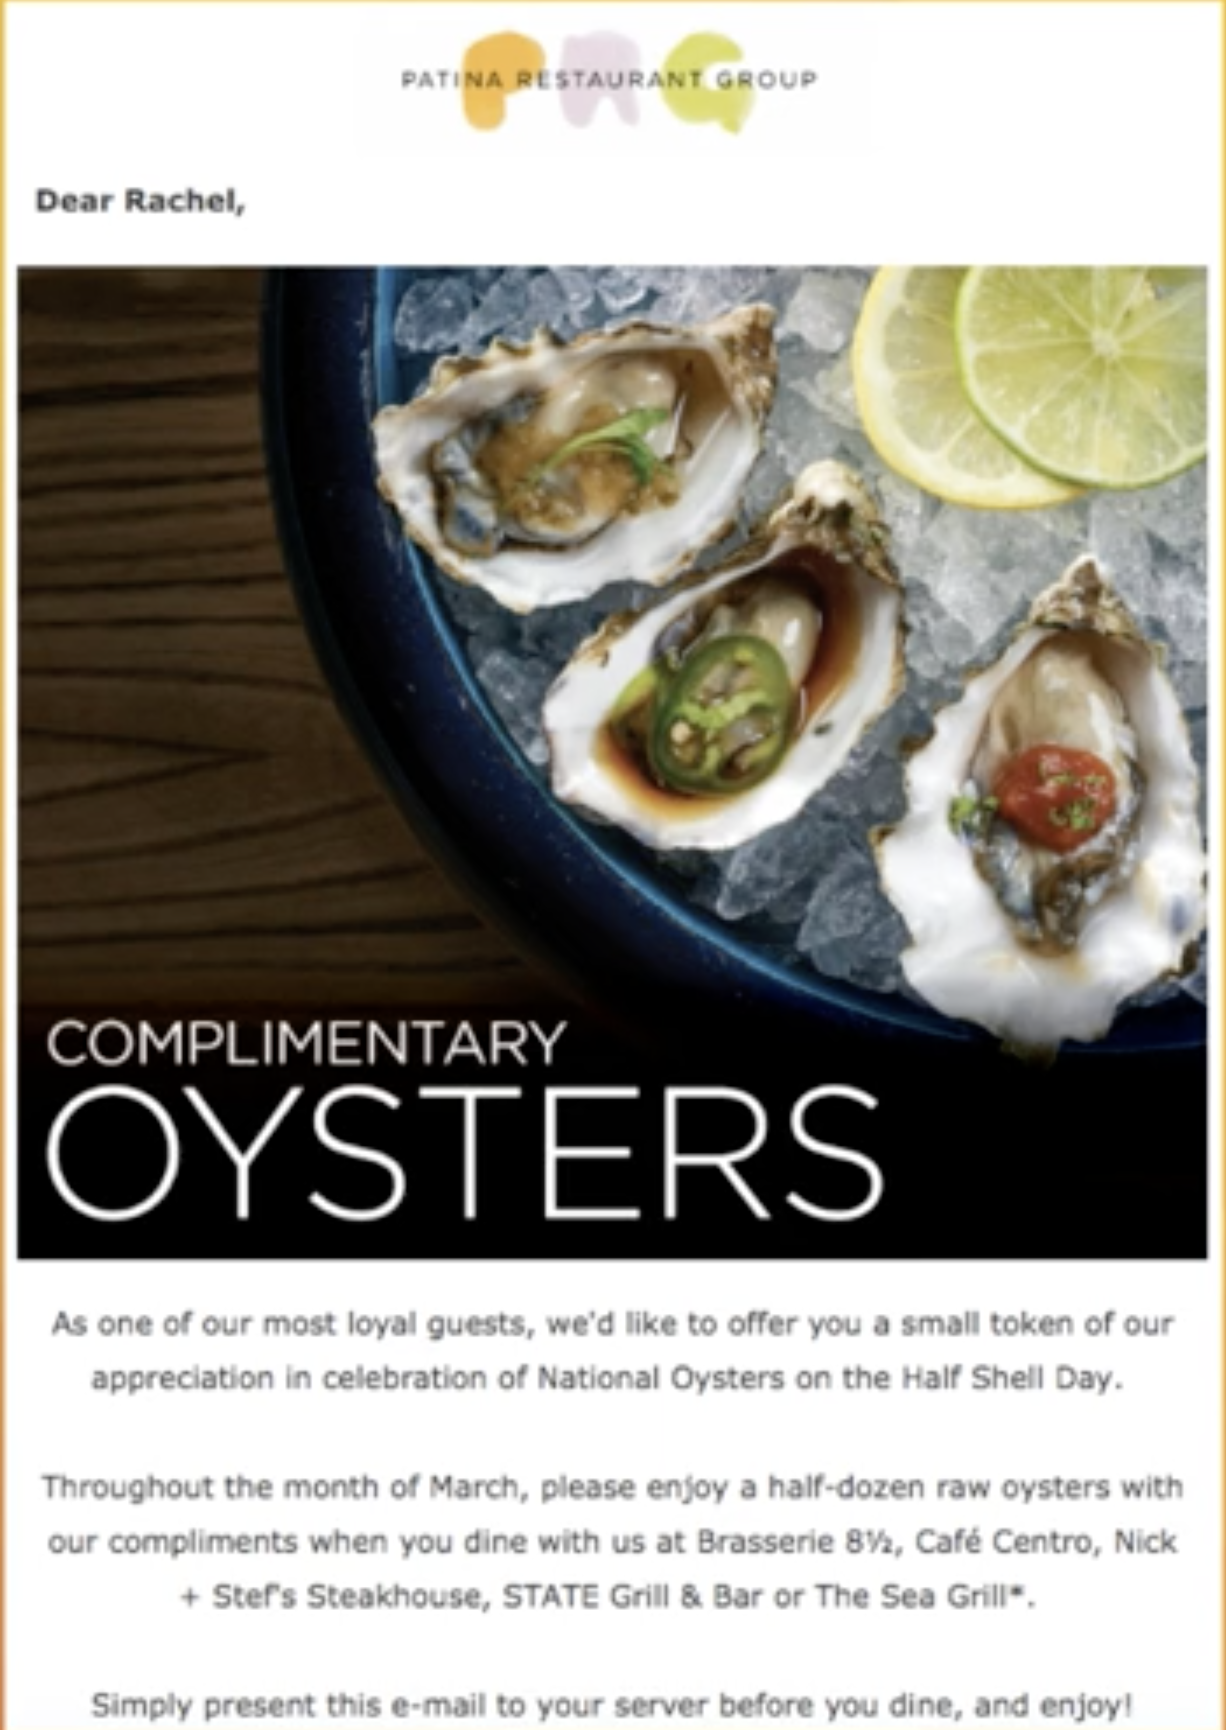 Complimentary oysters